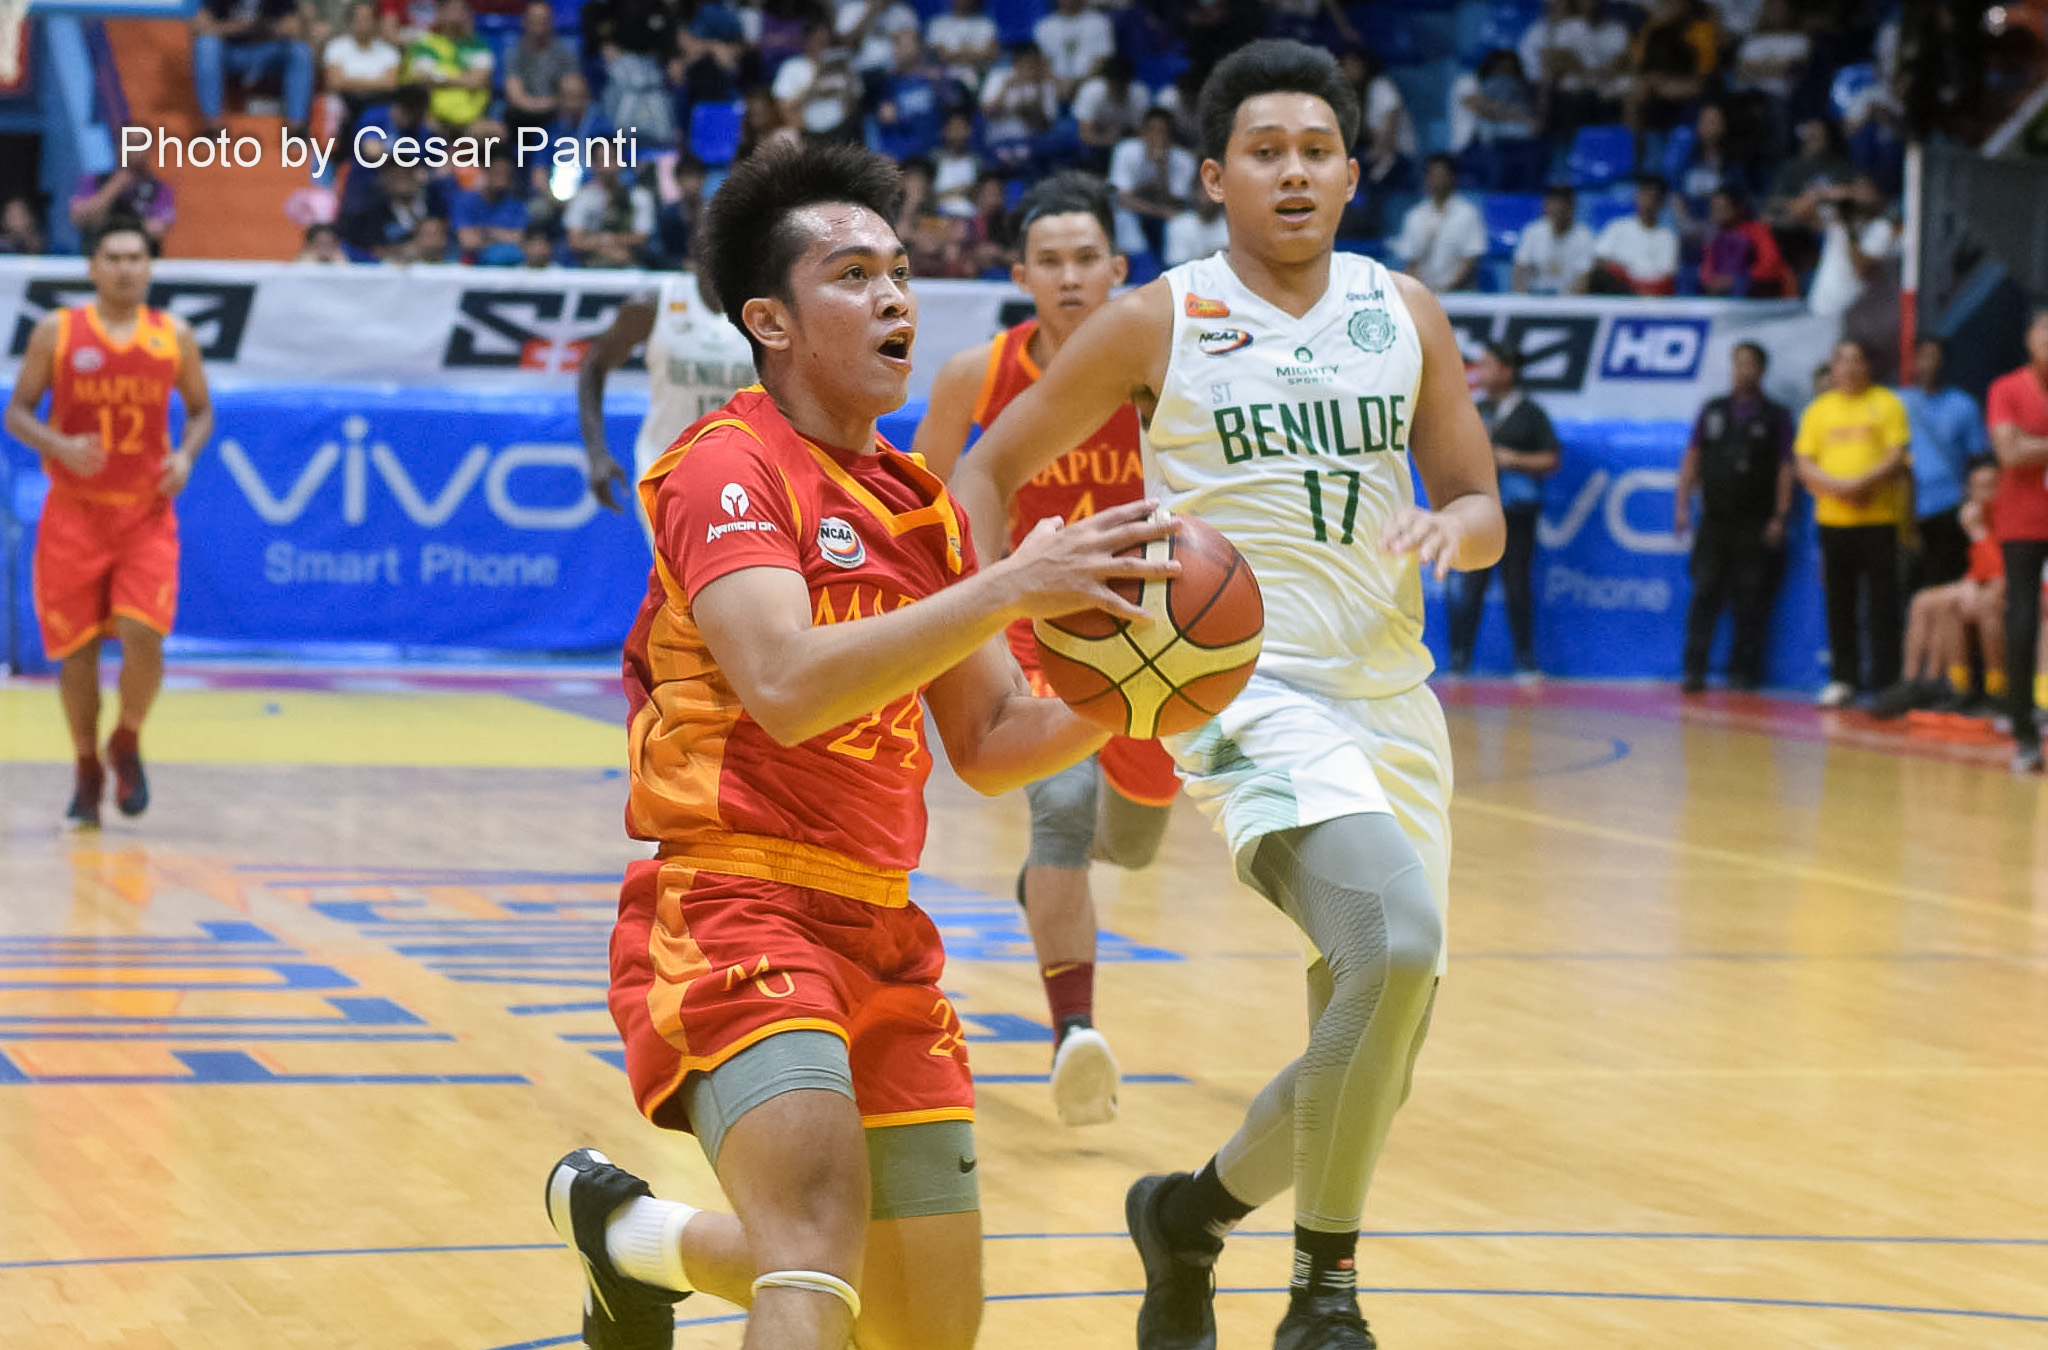 Mapua downs Benilde for first back-to-back wins